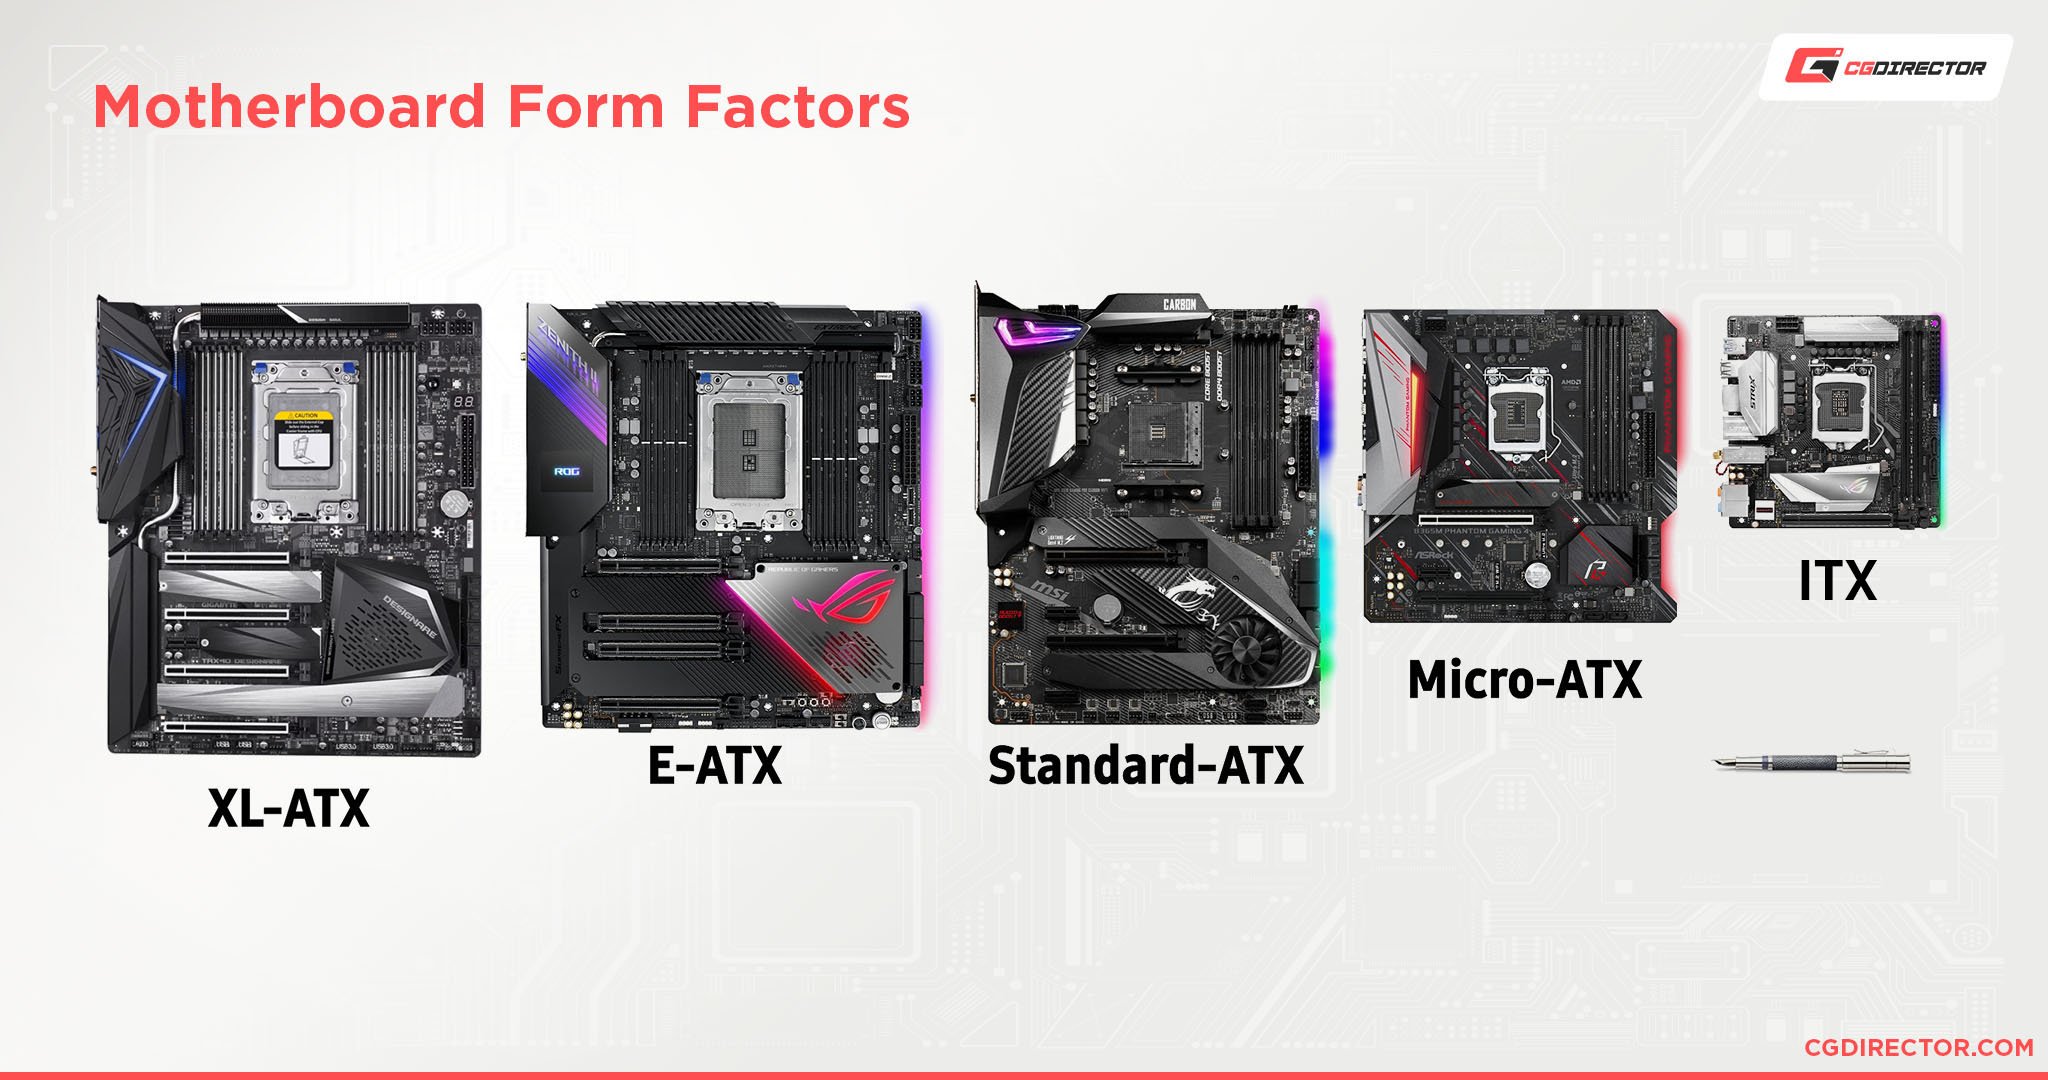 What Does ATX Stand For In A Motherboard?